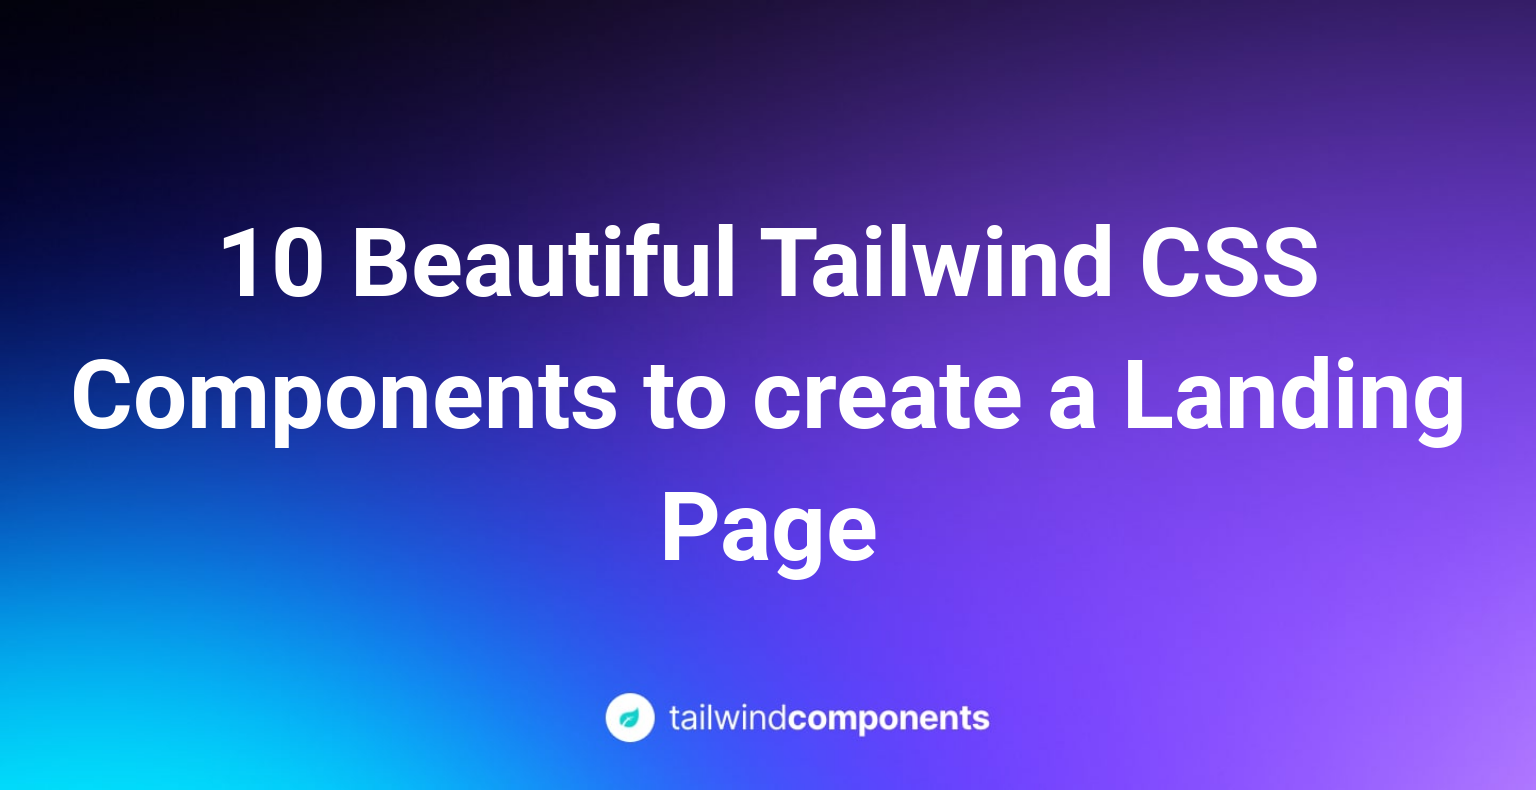 10 Beautiful Tailwind CSS Components to create a Landing Page Image